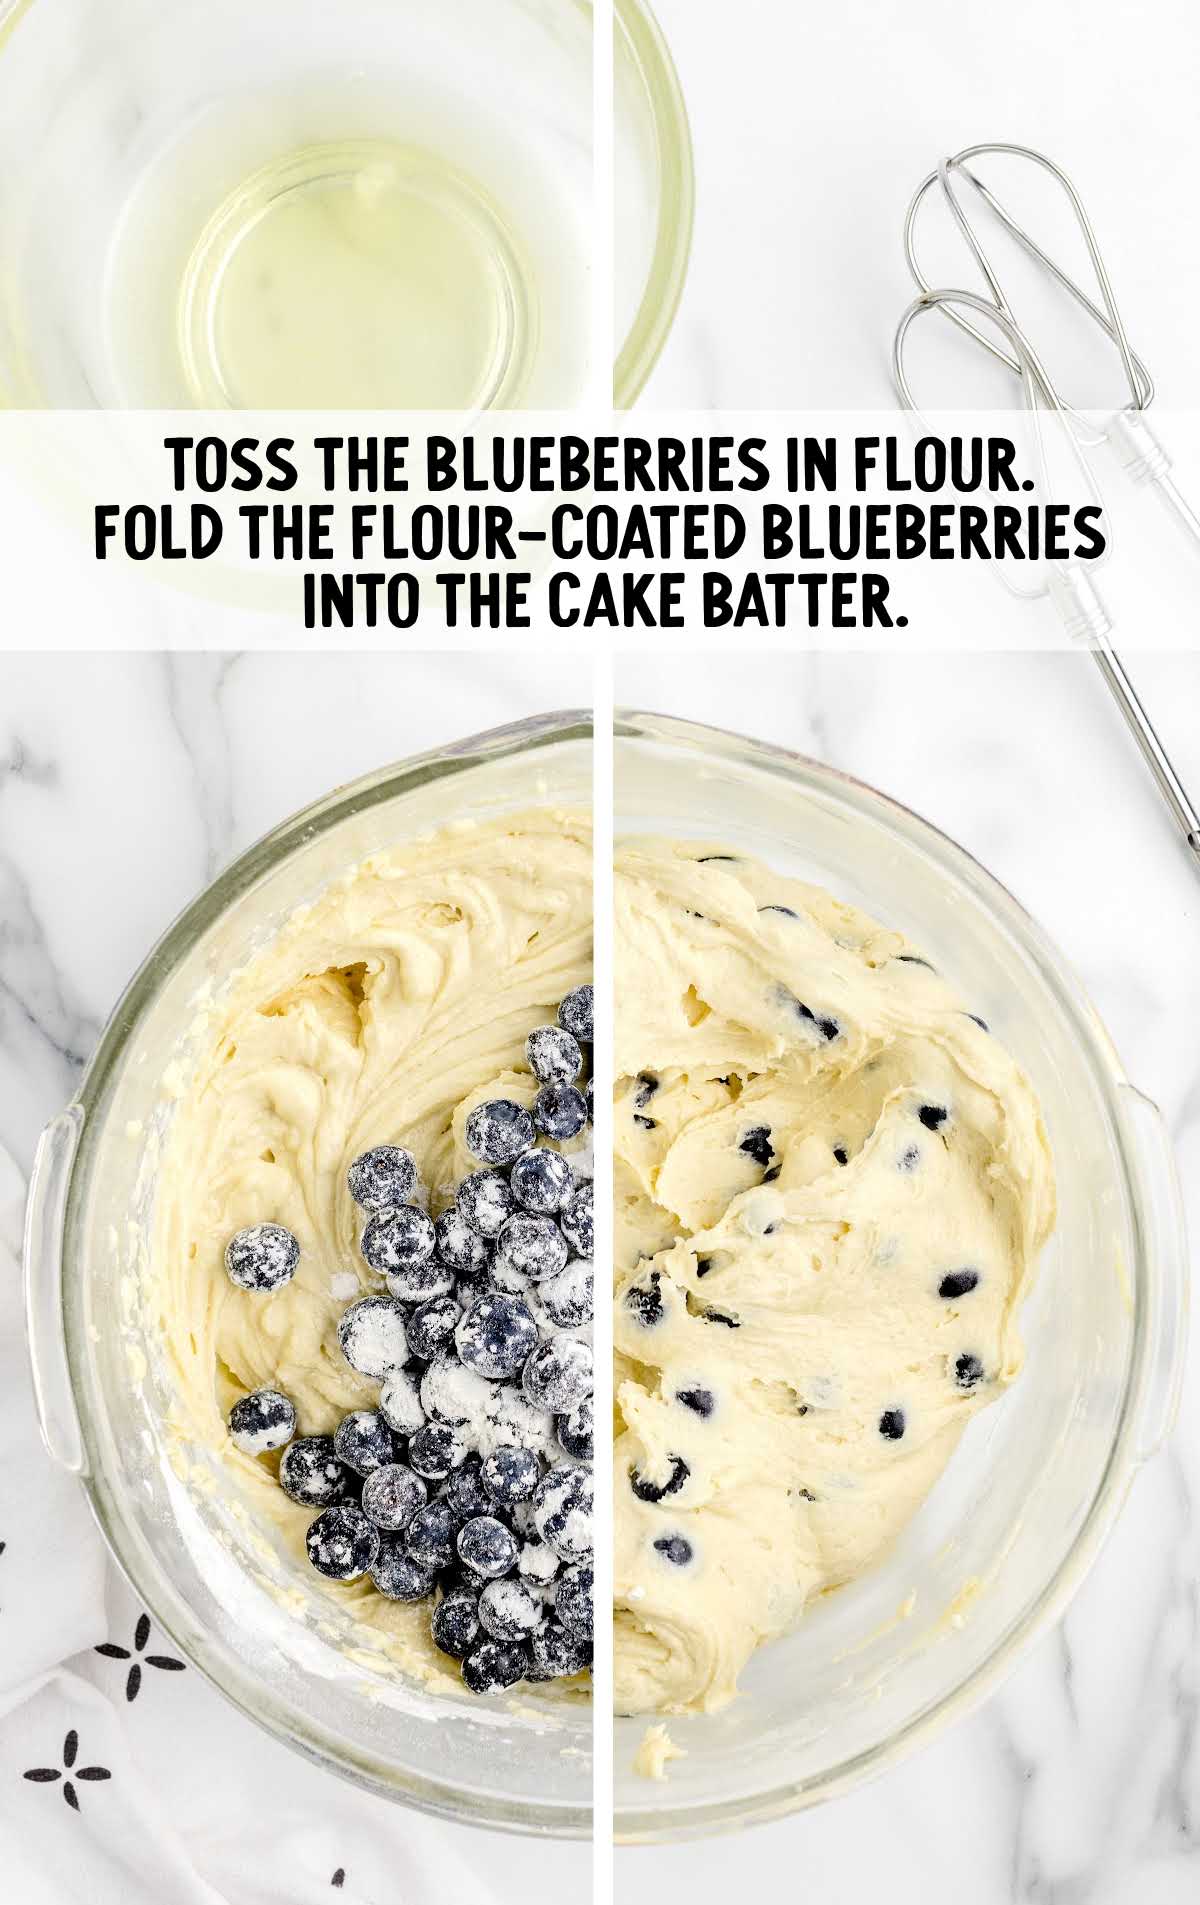 flour-coated blueberries added to the cake batter in a bowl